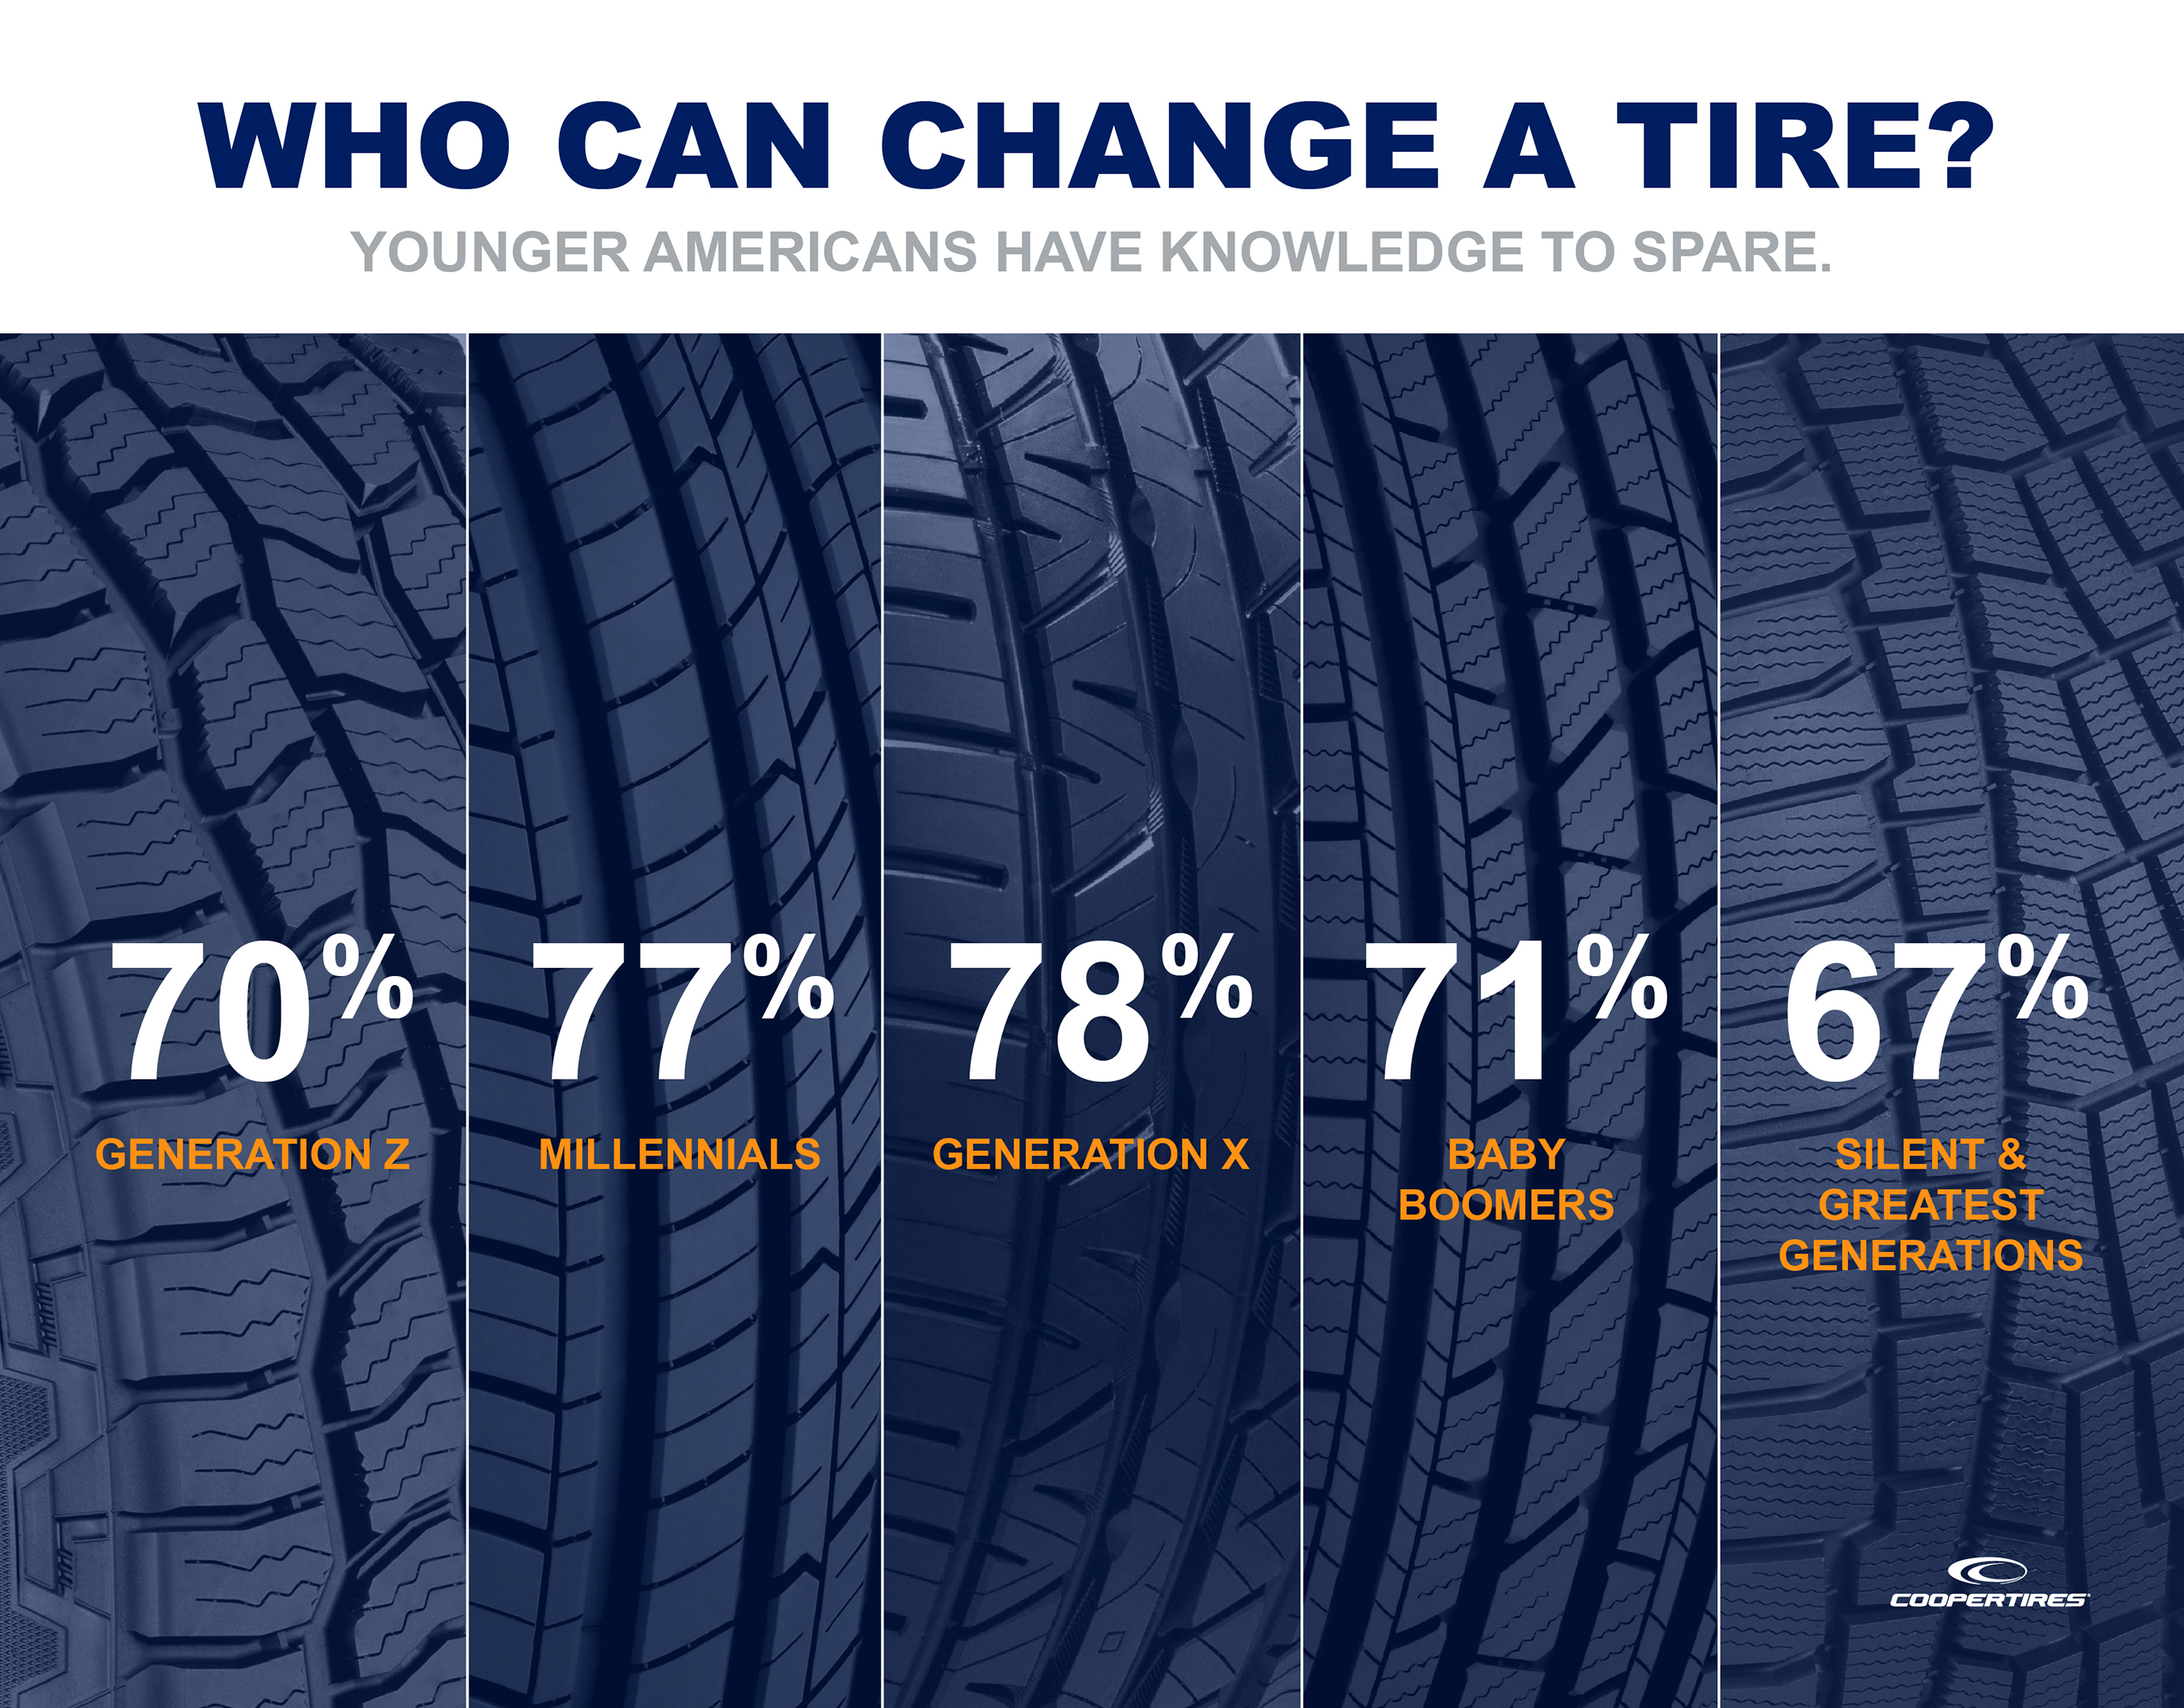 Who can change a tire?